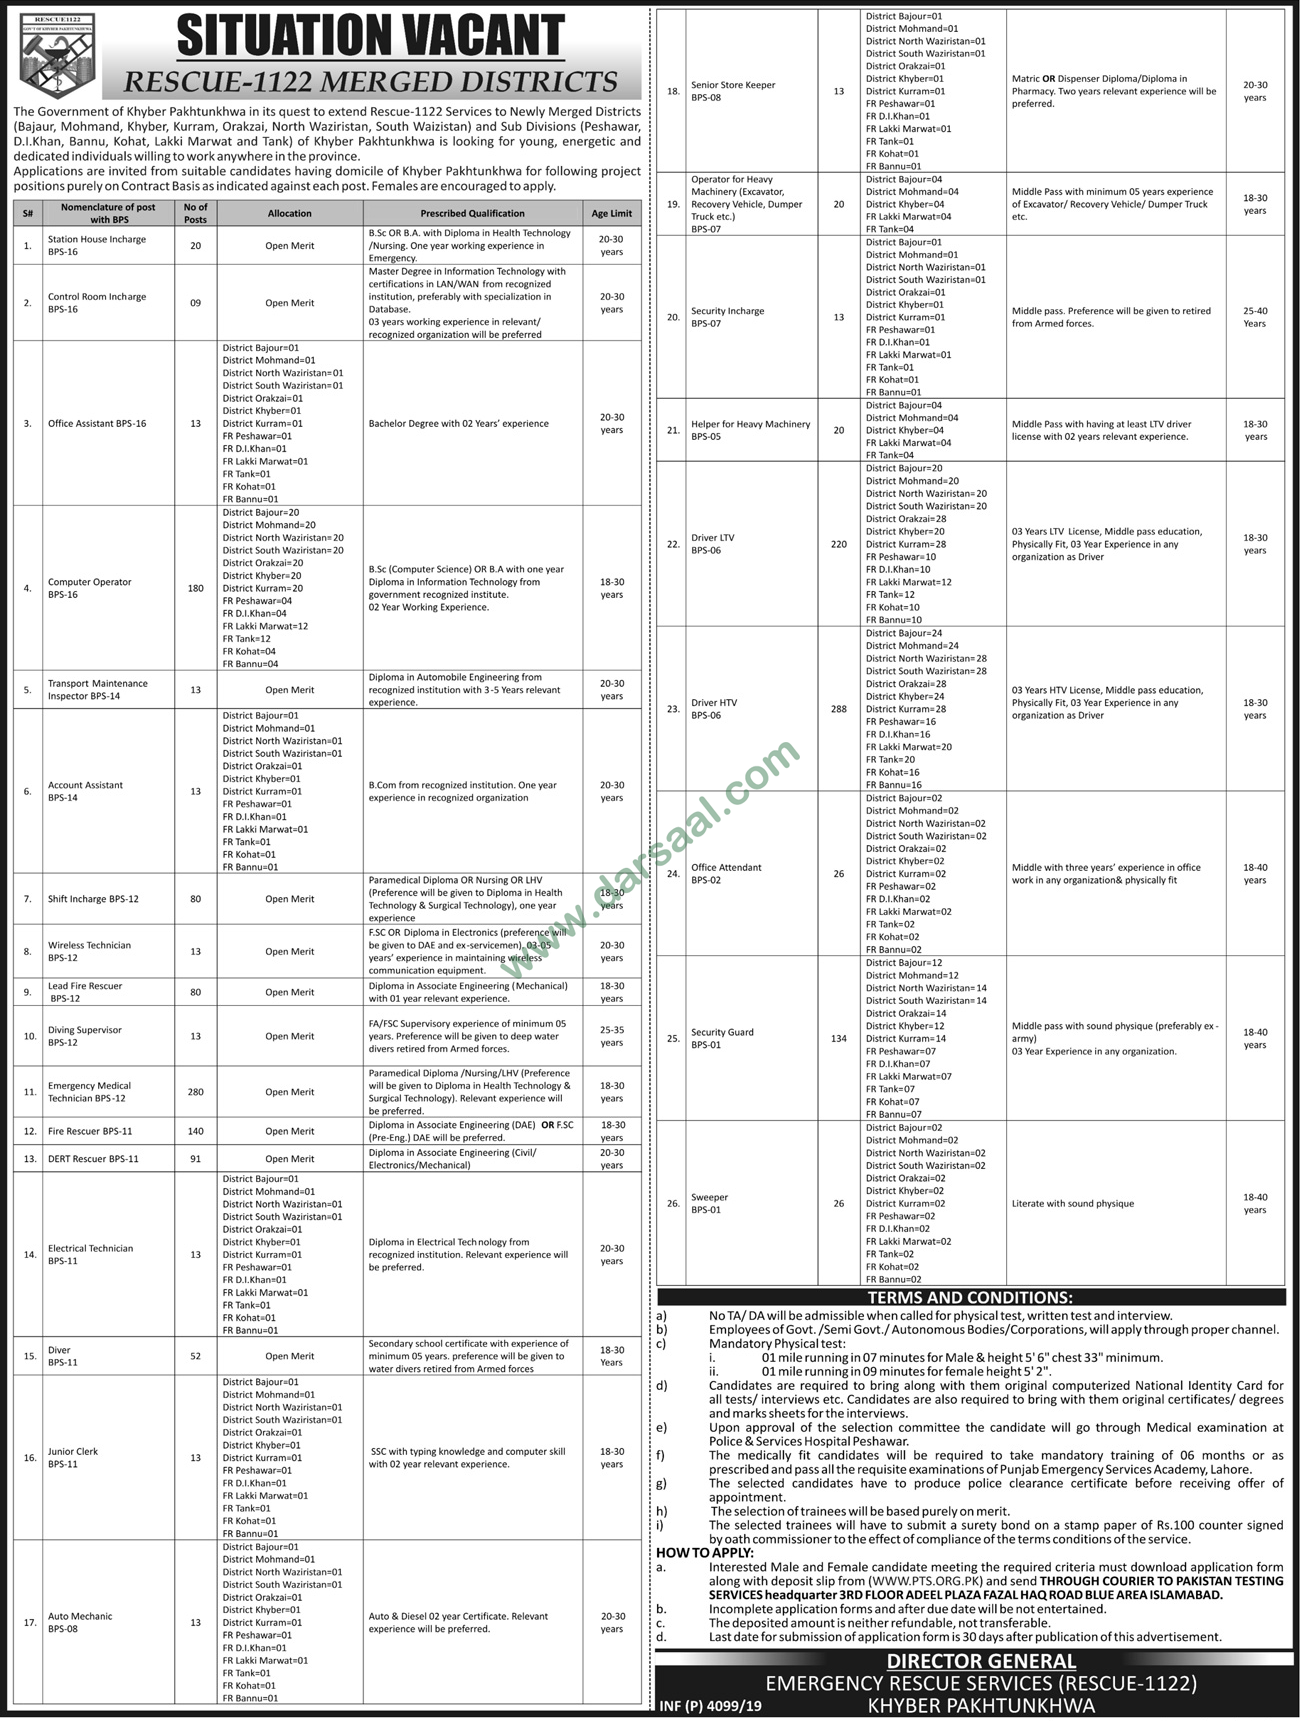 Emergency Medical Technologist Jobs in Rescue 1122 in Peshawar - Sep 27, 2019